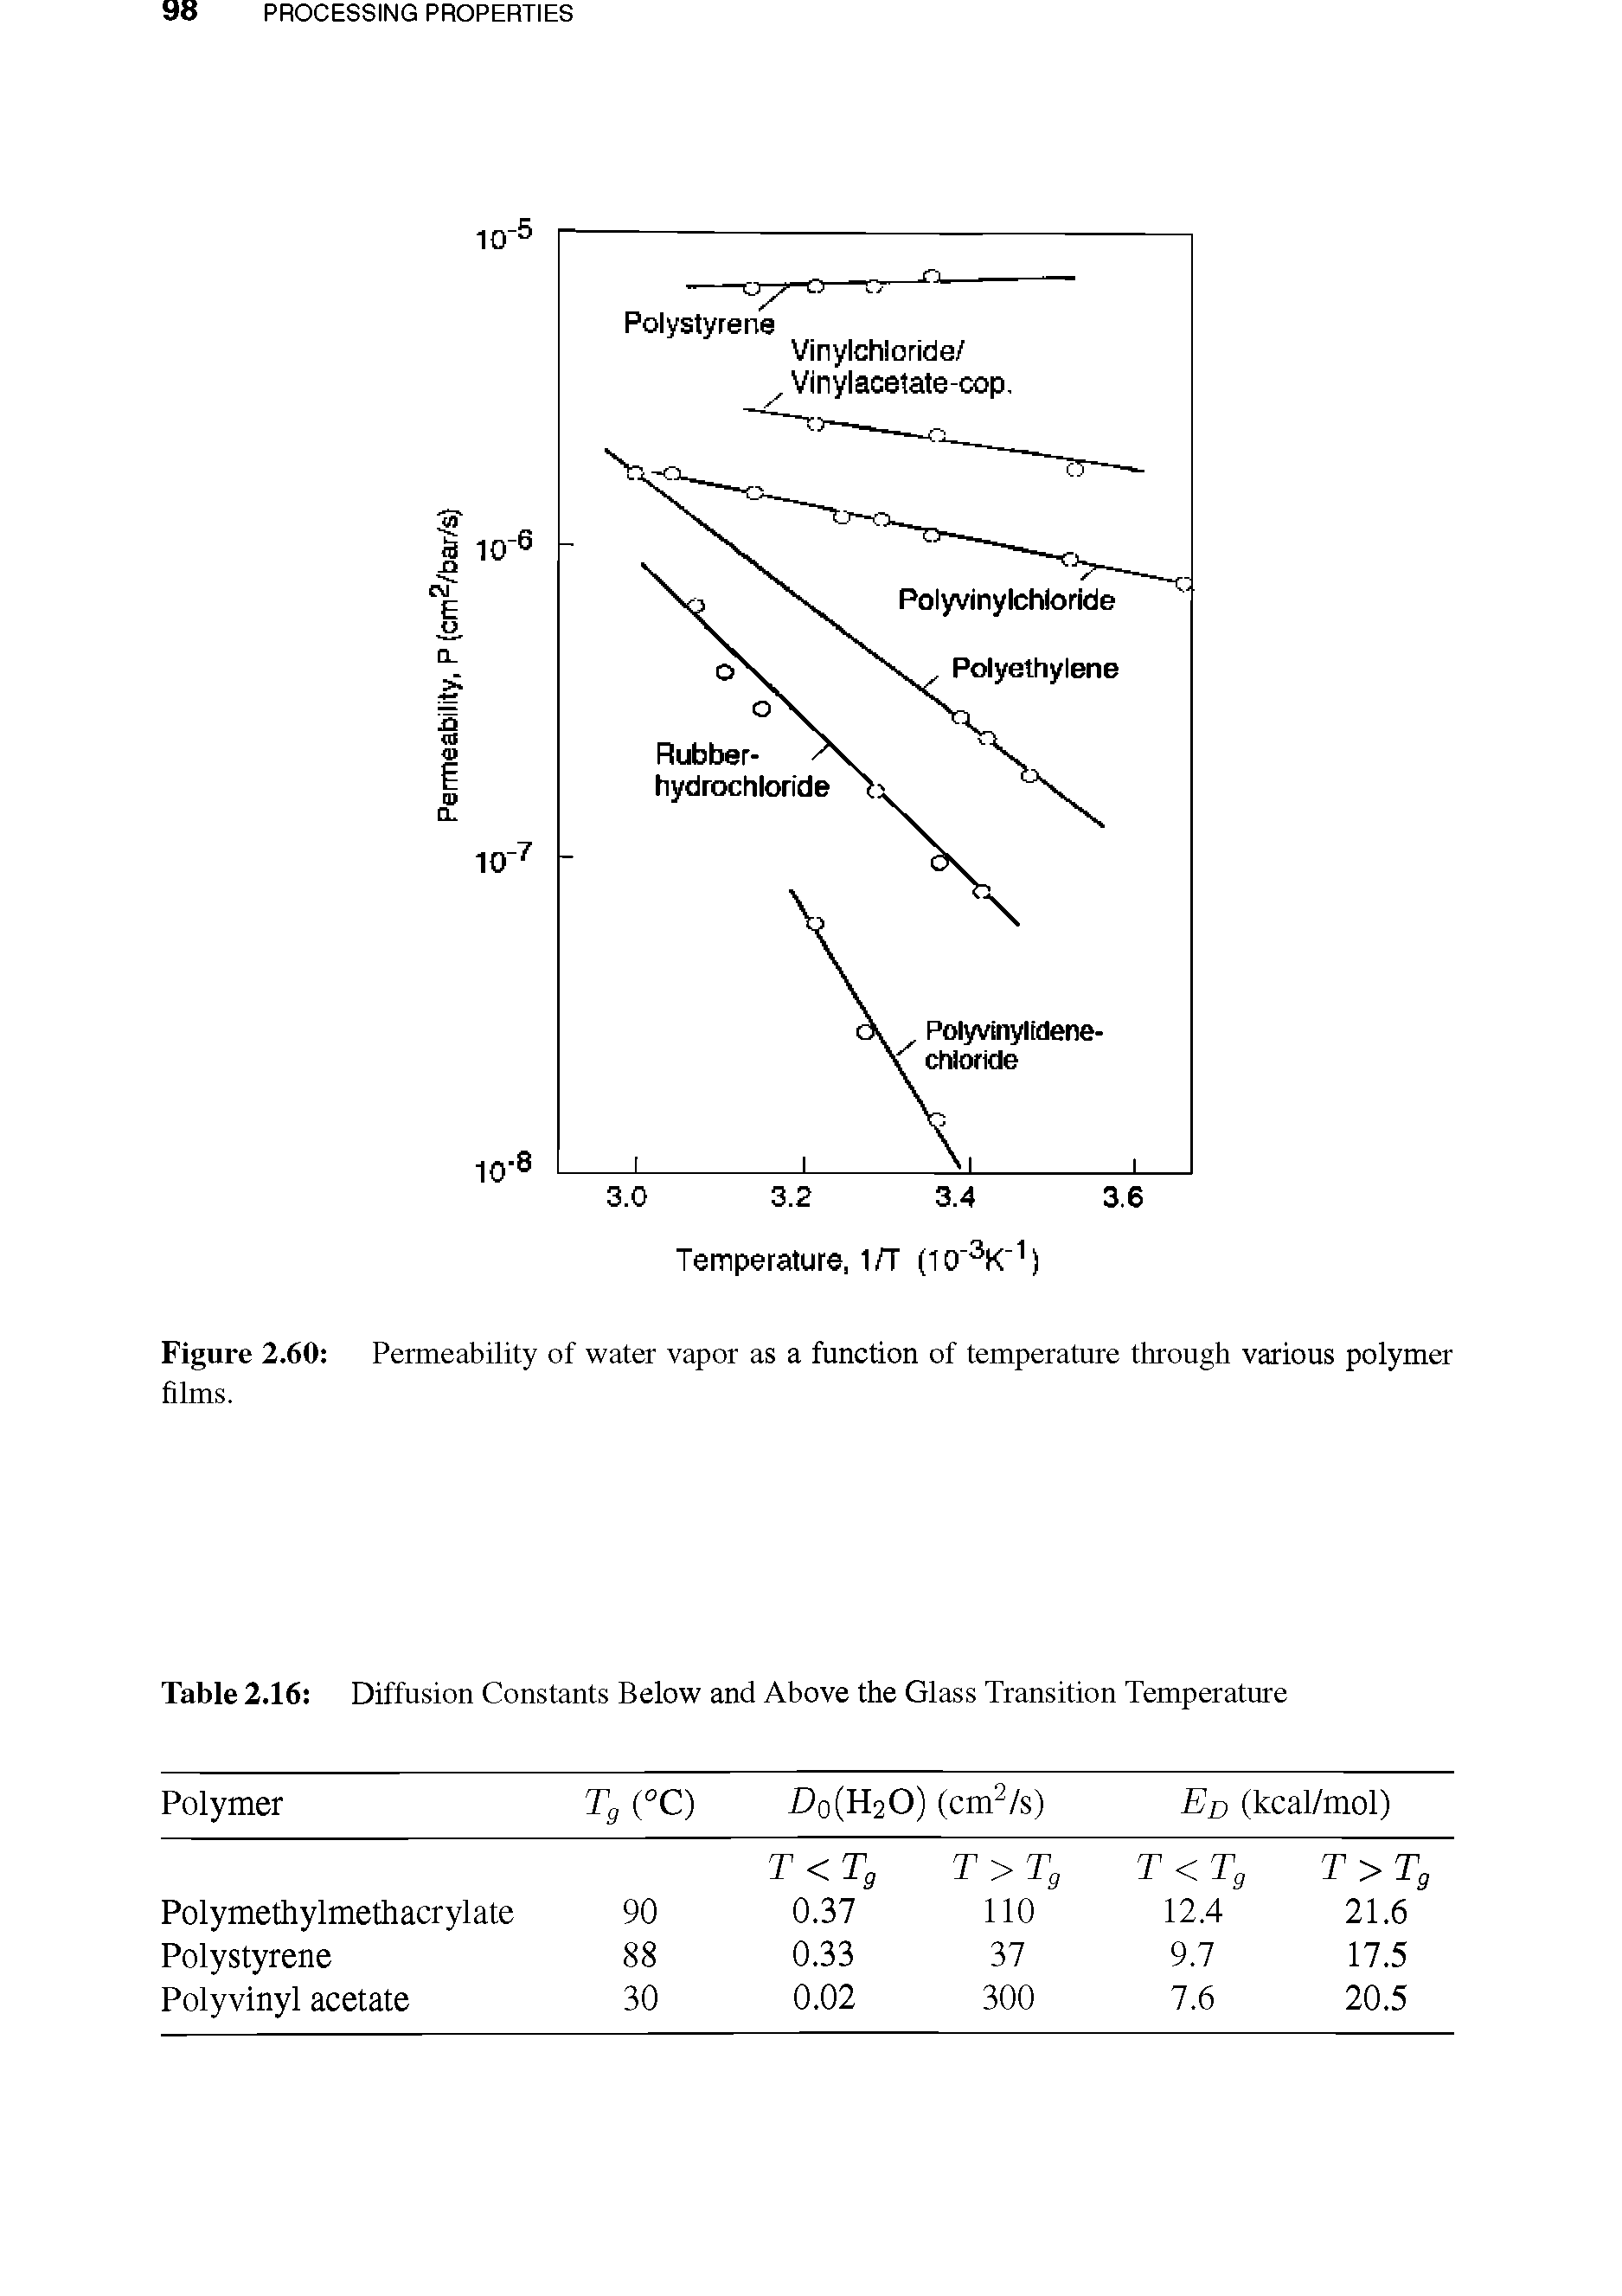 Figure 2.60 Permeability of water vapor as a function of temperature through various polymer films.